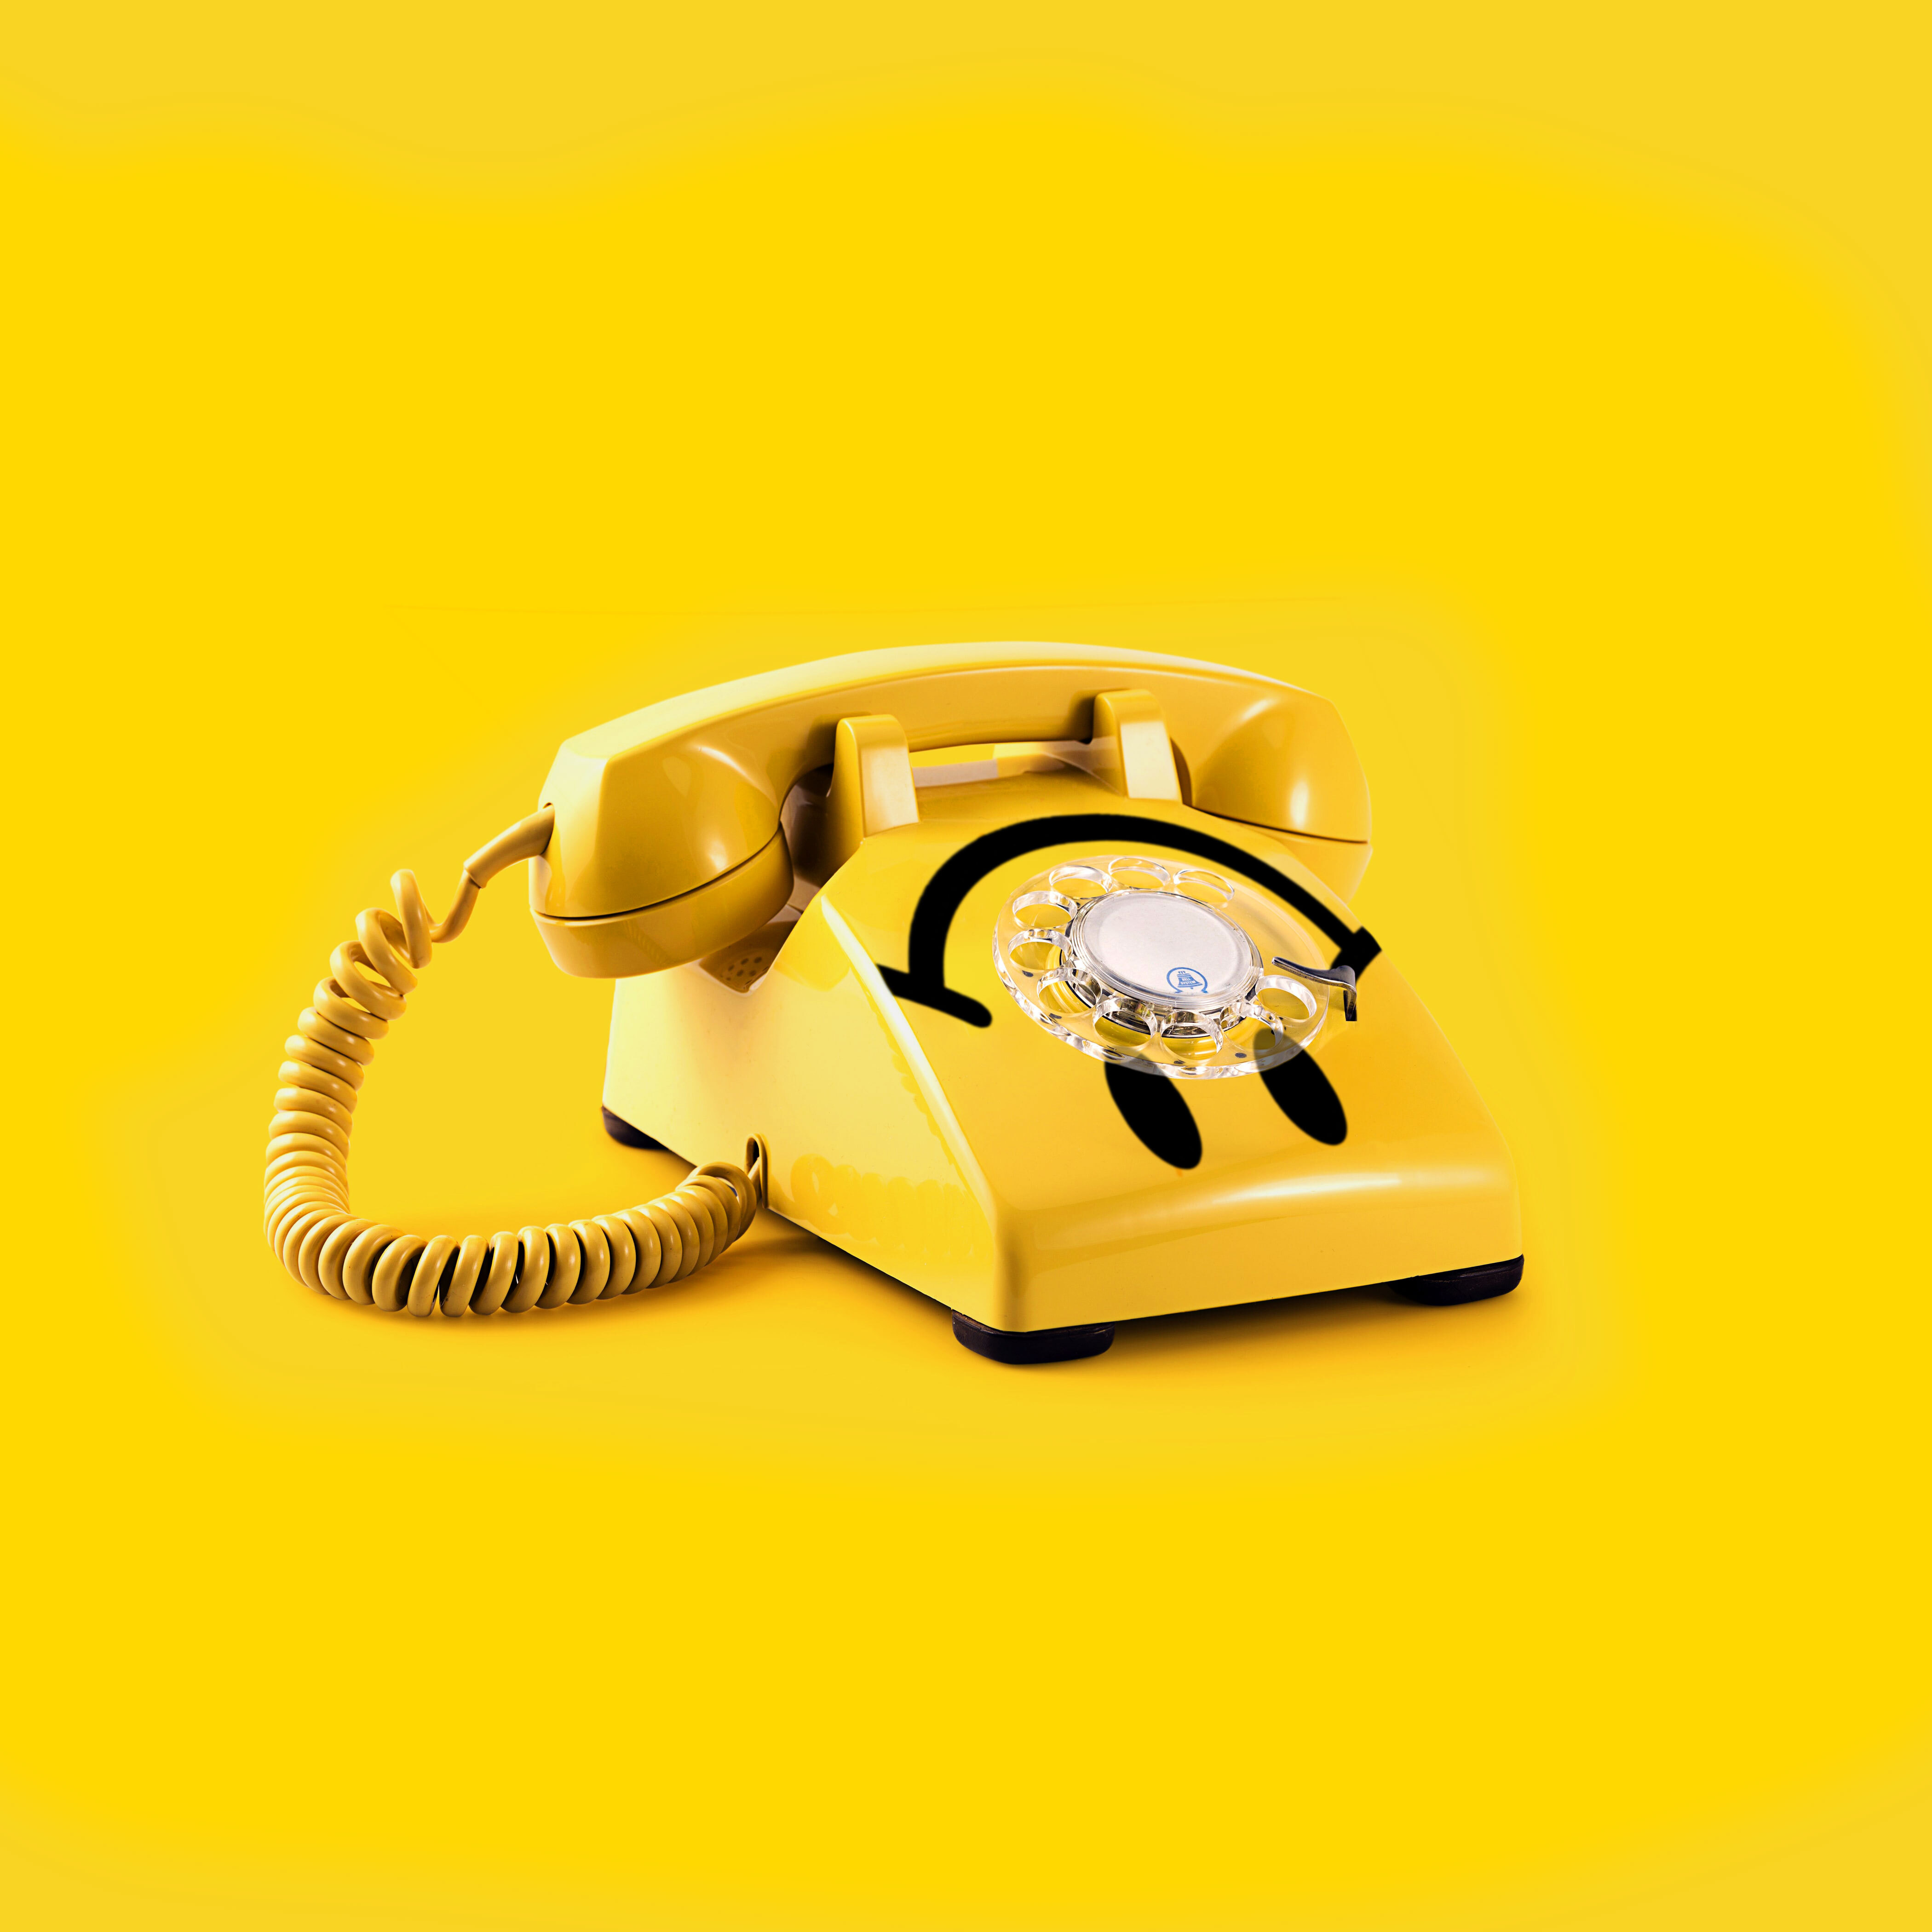 yellow rotary dial phone with underunderstood upside down smiley face on it